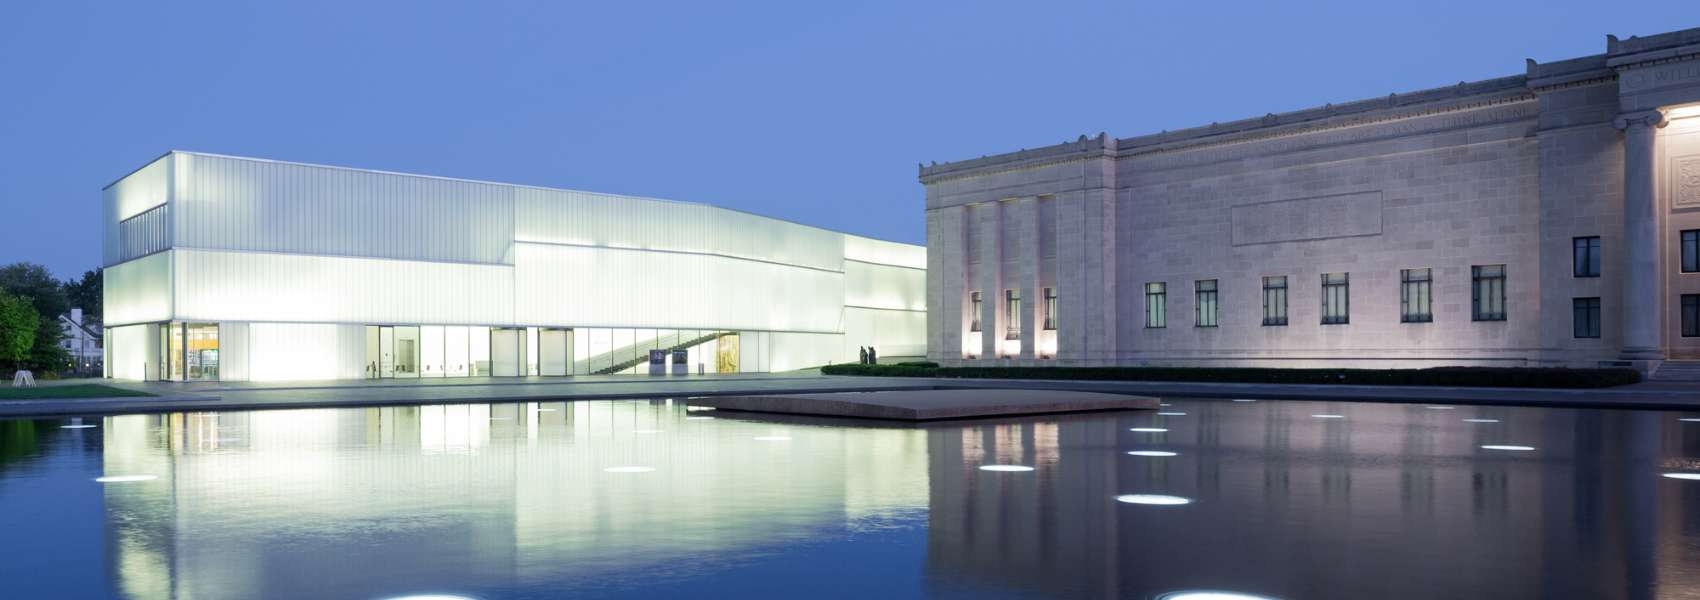 The Nelson-Atkins Museum of Art |